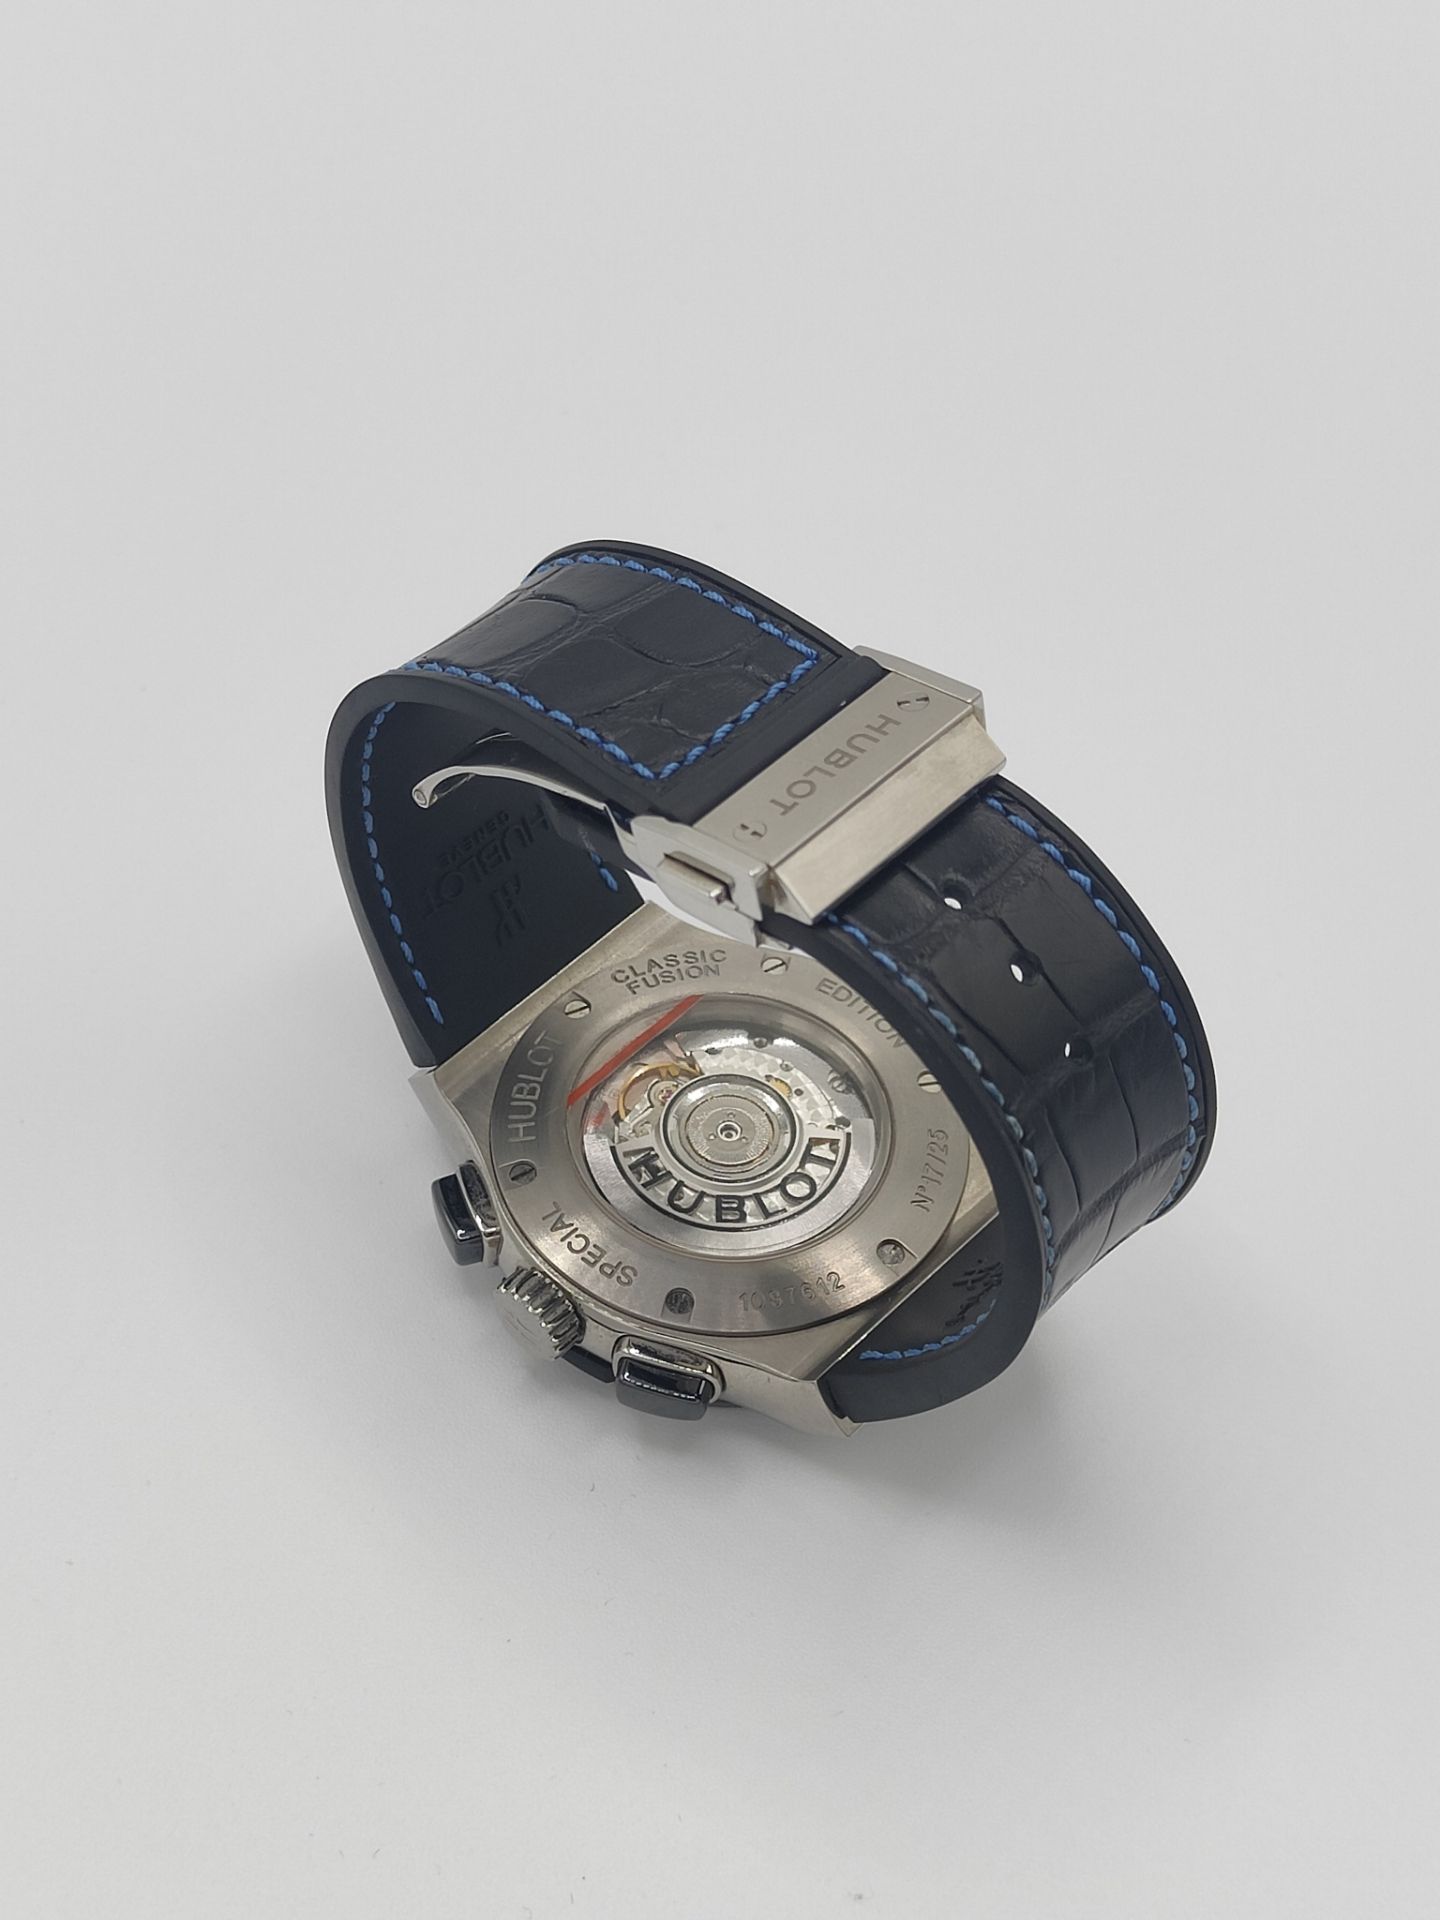 Hublot Classic Fusion Special Edition Watch - Image 6 of 11